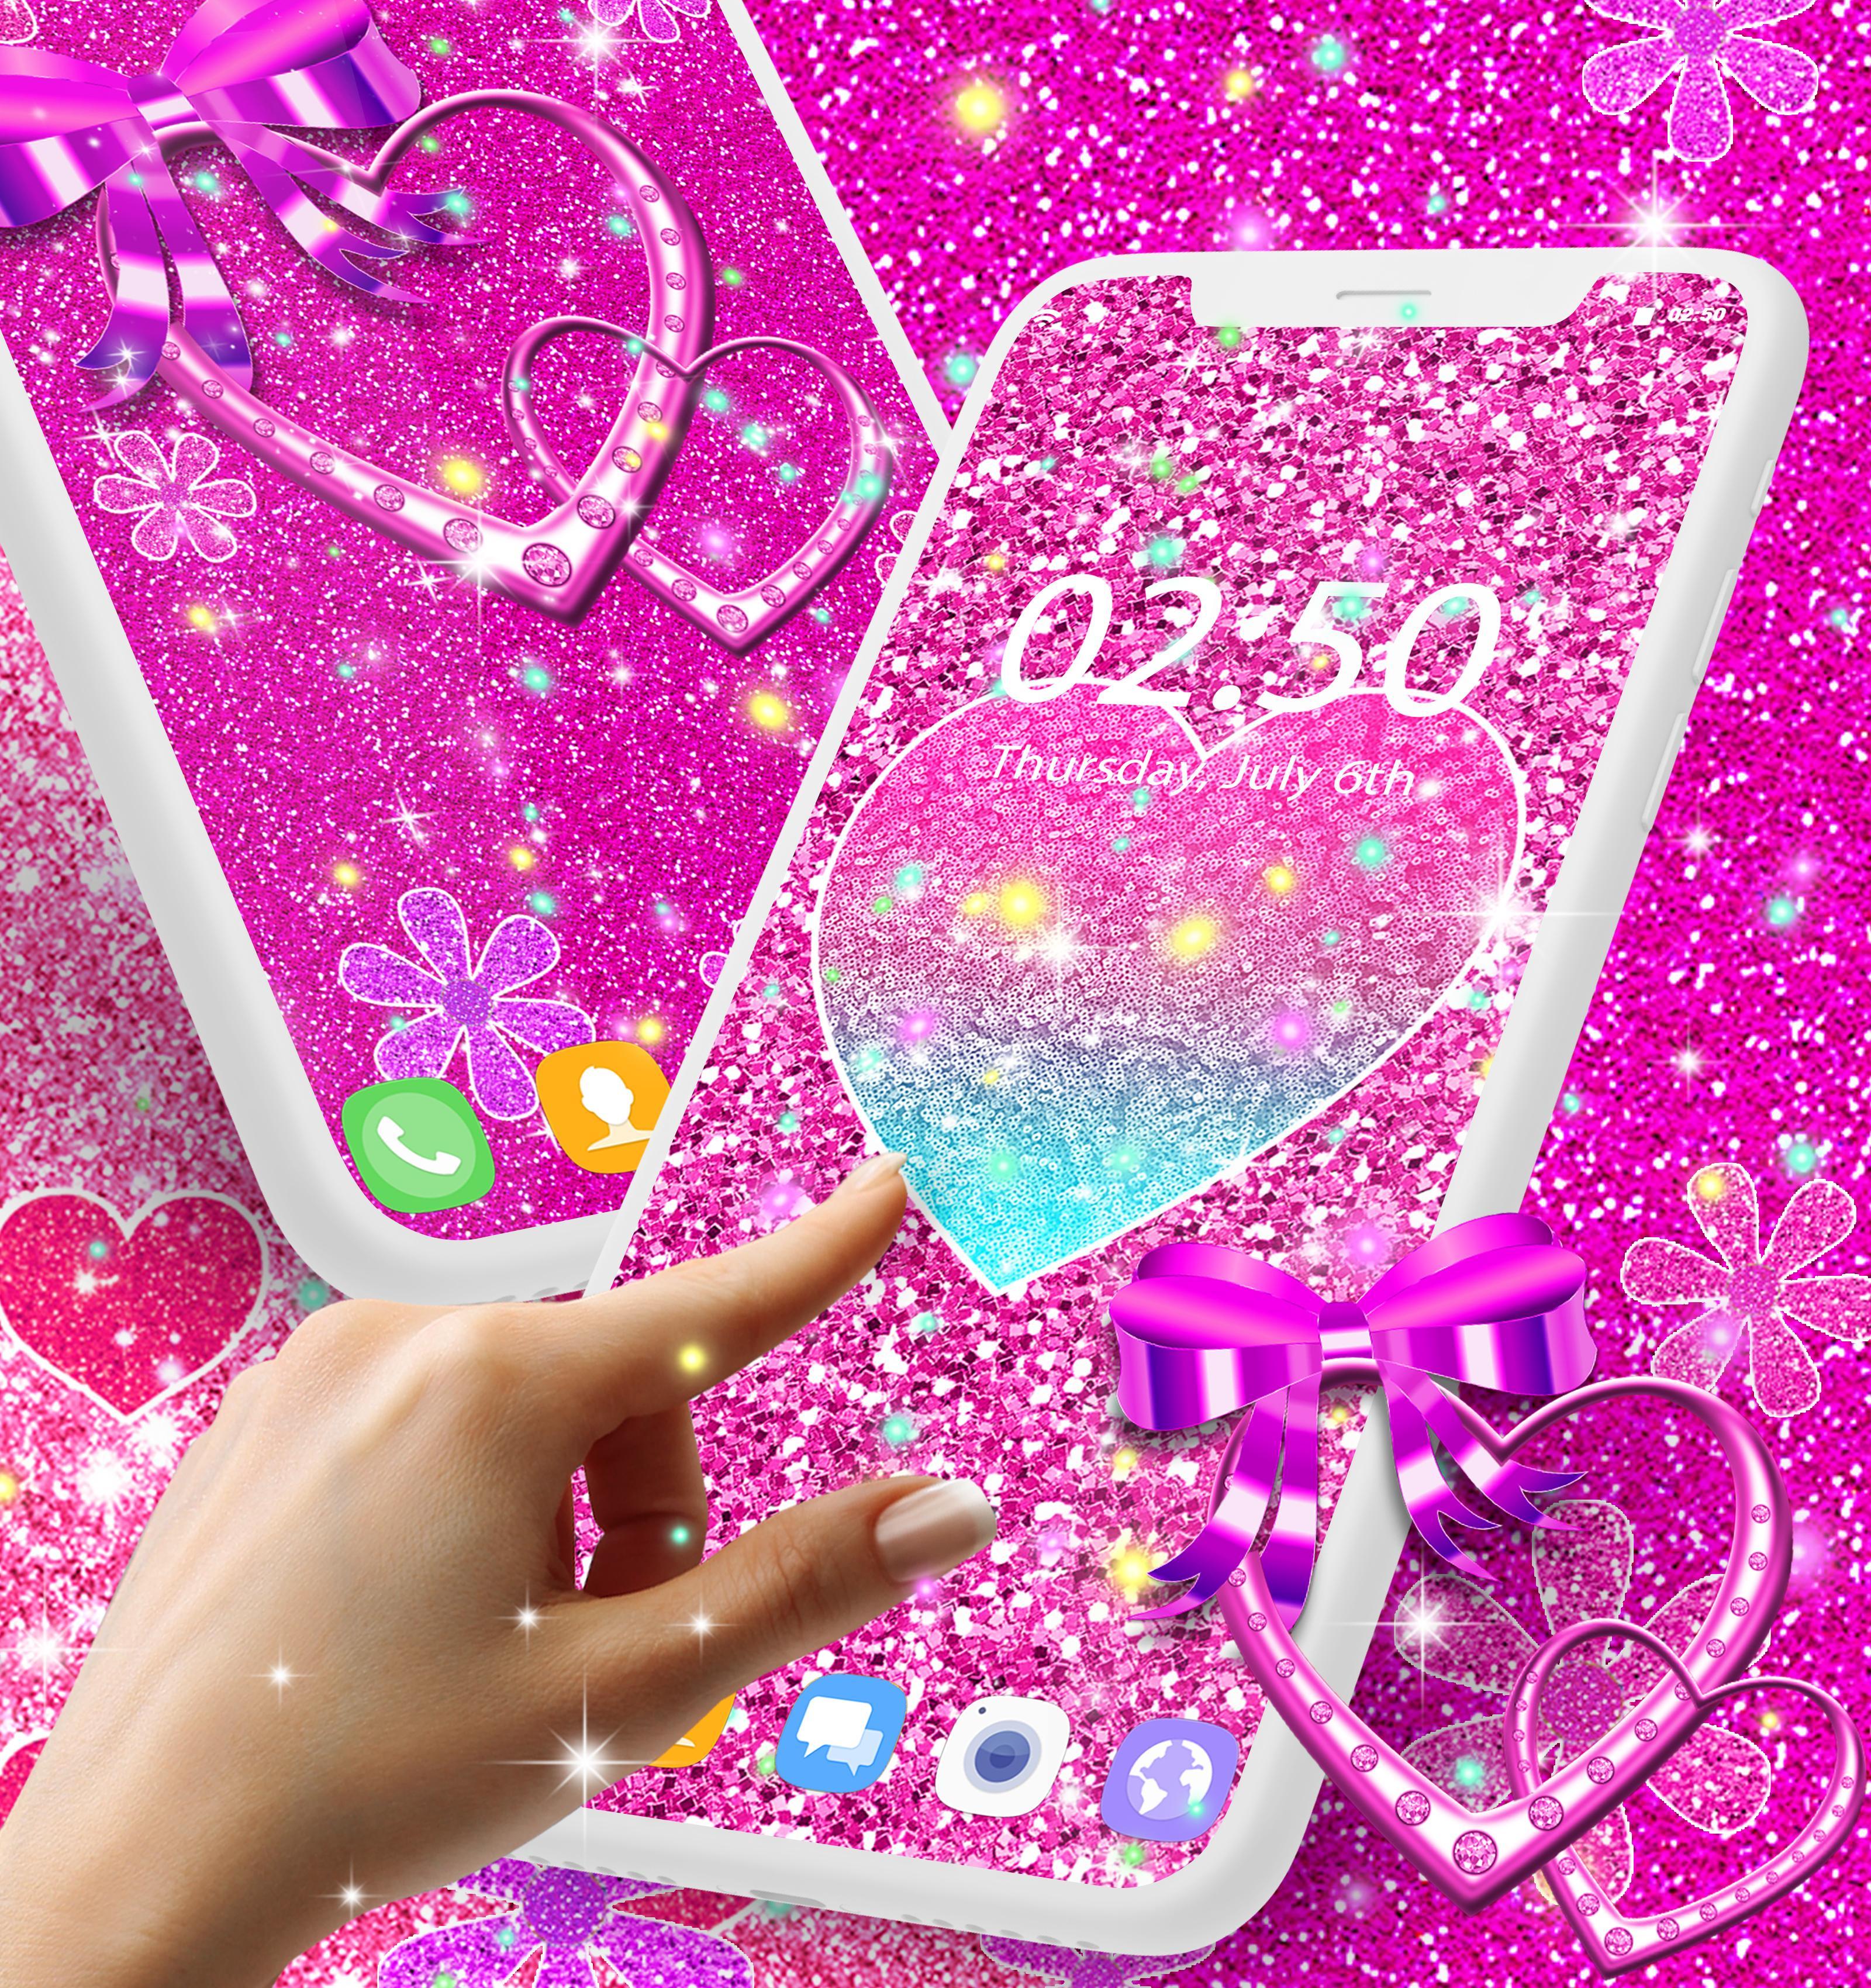 Great Glitter Live Wallpaper Free Download of the decade The ultimate guide 